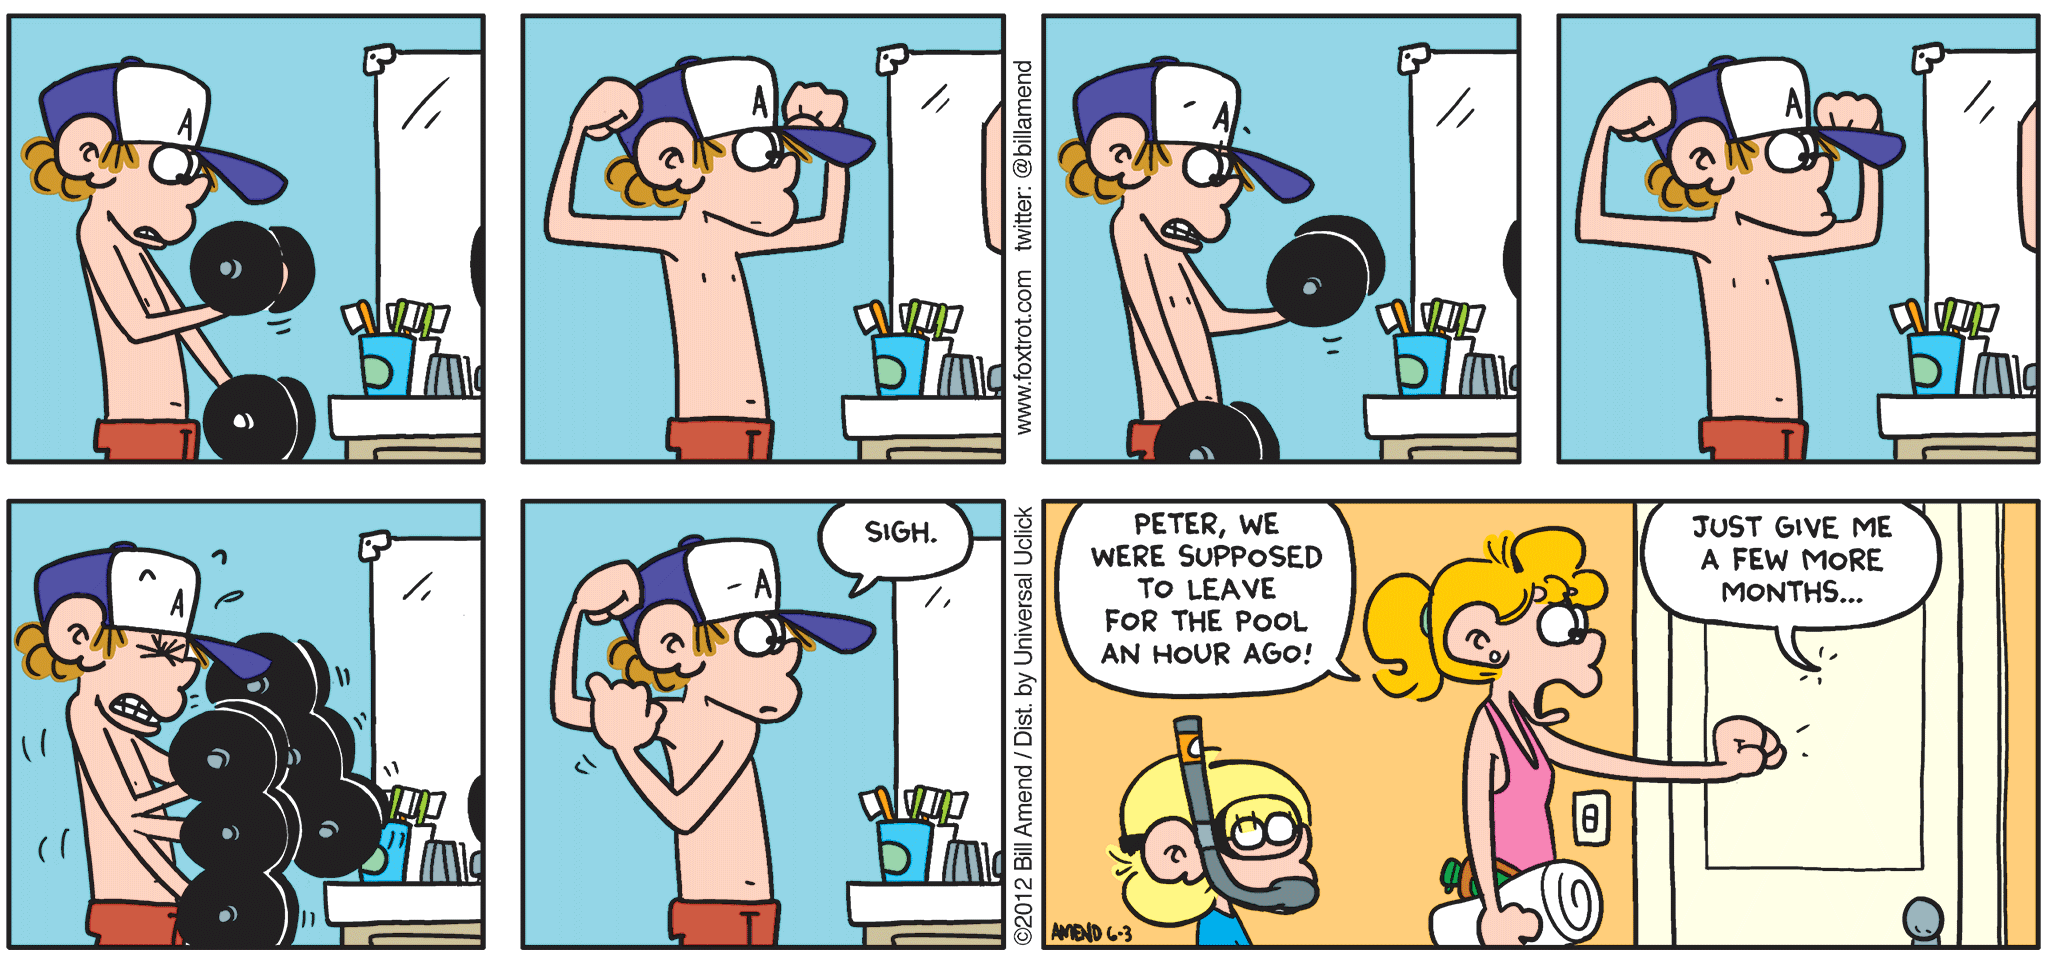 FoxTrot comic strip by Bill Amend - "Weight Weight" published June 3, 2012 - Peter: Sigh. Paige: Peter, we were supposed to leave for the pool an hour ago! Peter: Just give me a few more months...